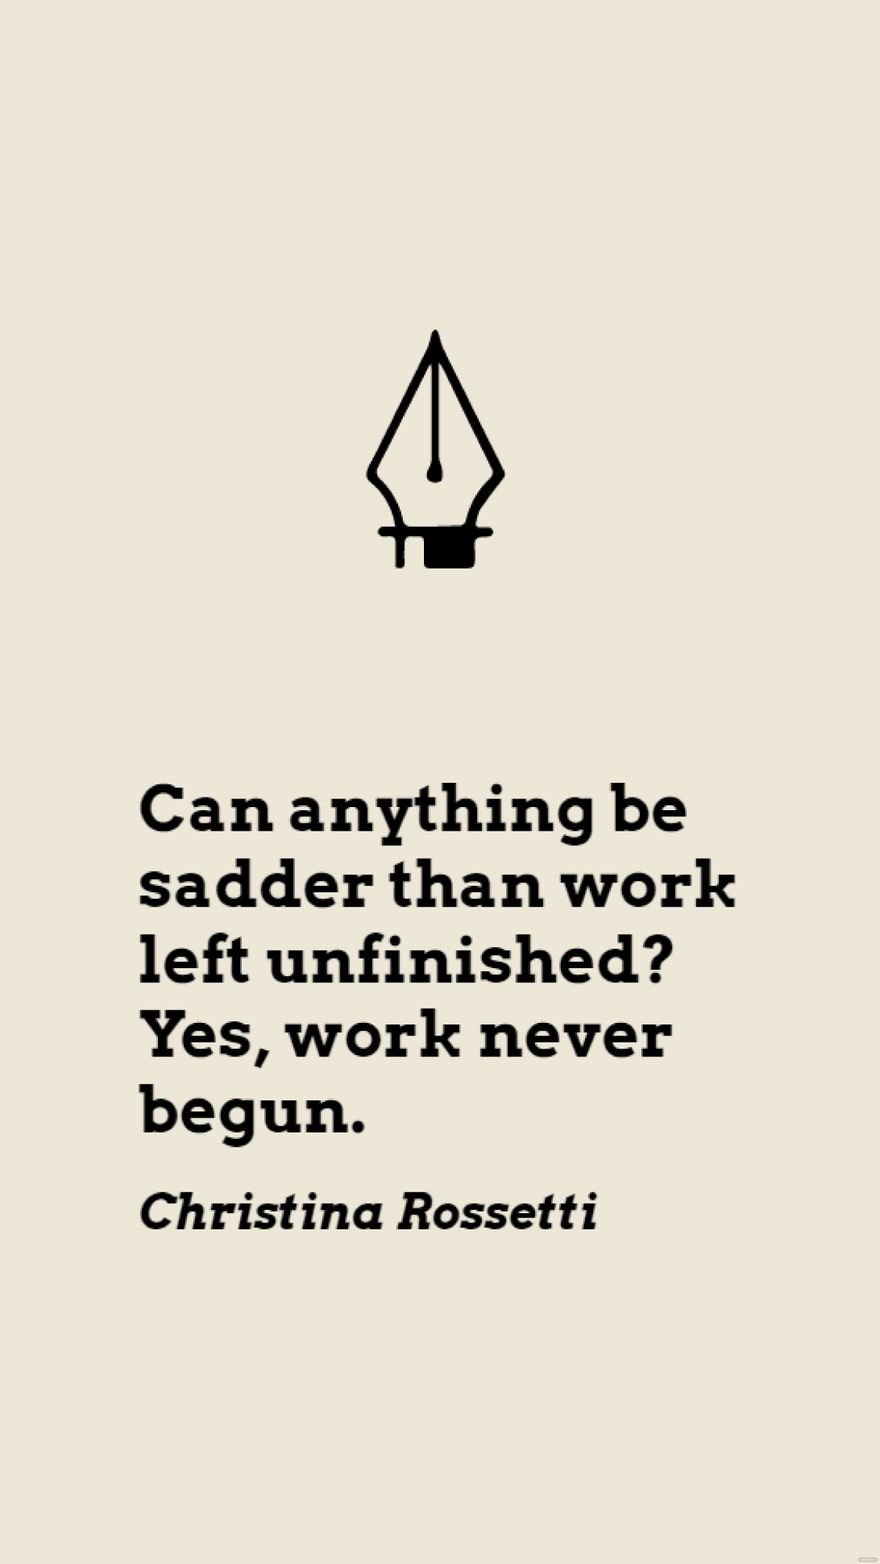 Christina Rossetti - Can anything be sadder than work left unfinished? Yes, work never begun.